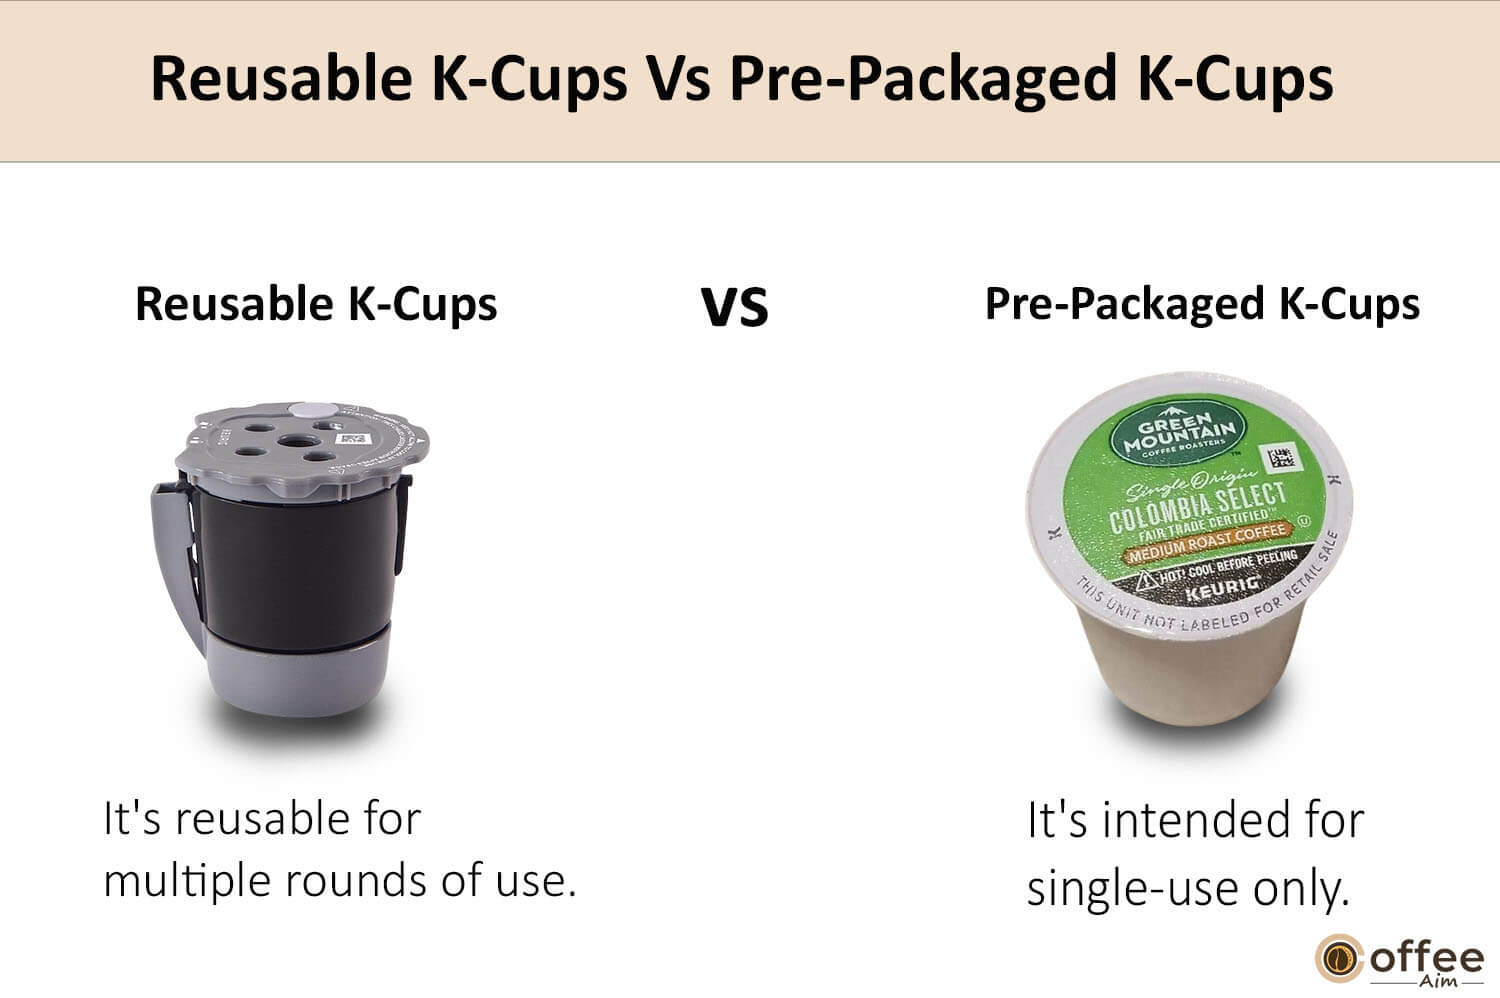 In this picture, I'm illustrating the reusable k-cups vs pre-packed k-cup